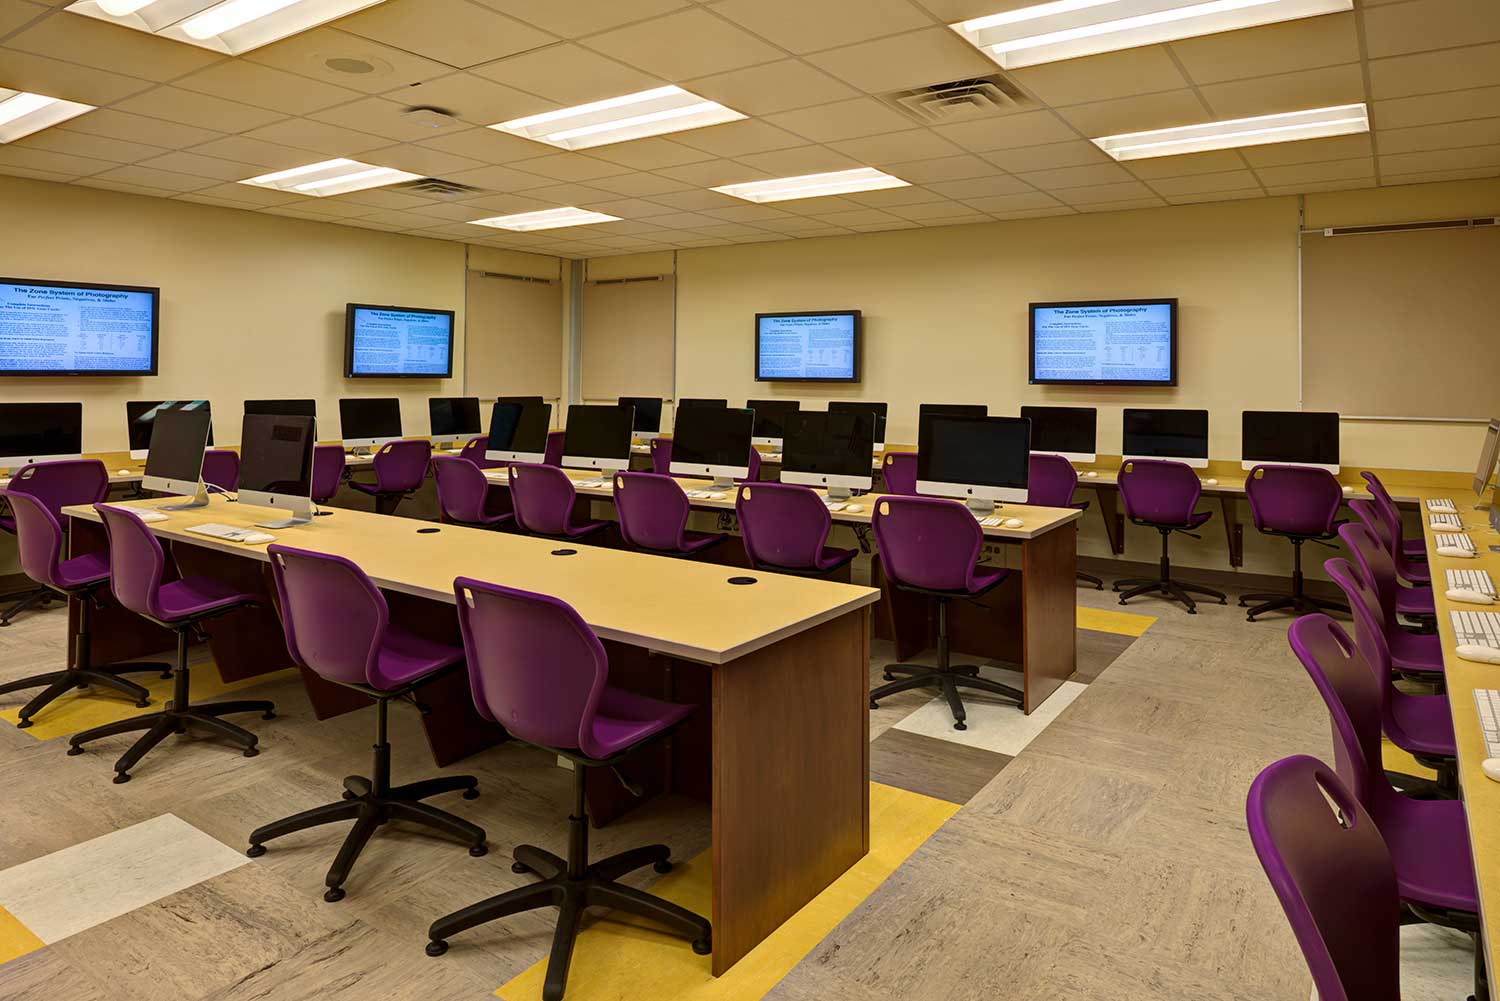 Mosaic Associates designed classrooms with university caliber technology to change the learning dynamic at Doyle Middle School in Troy, NY.